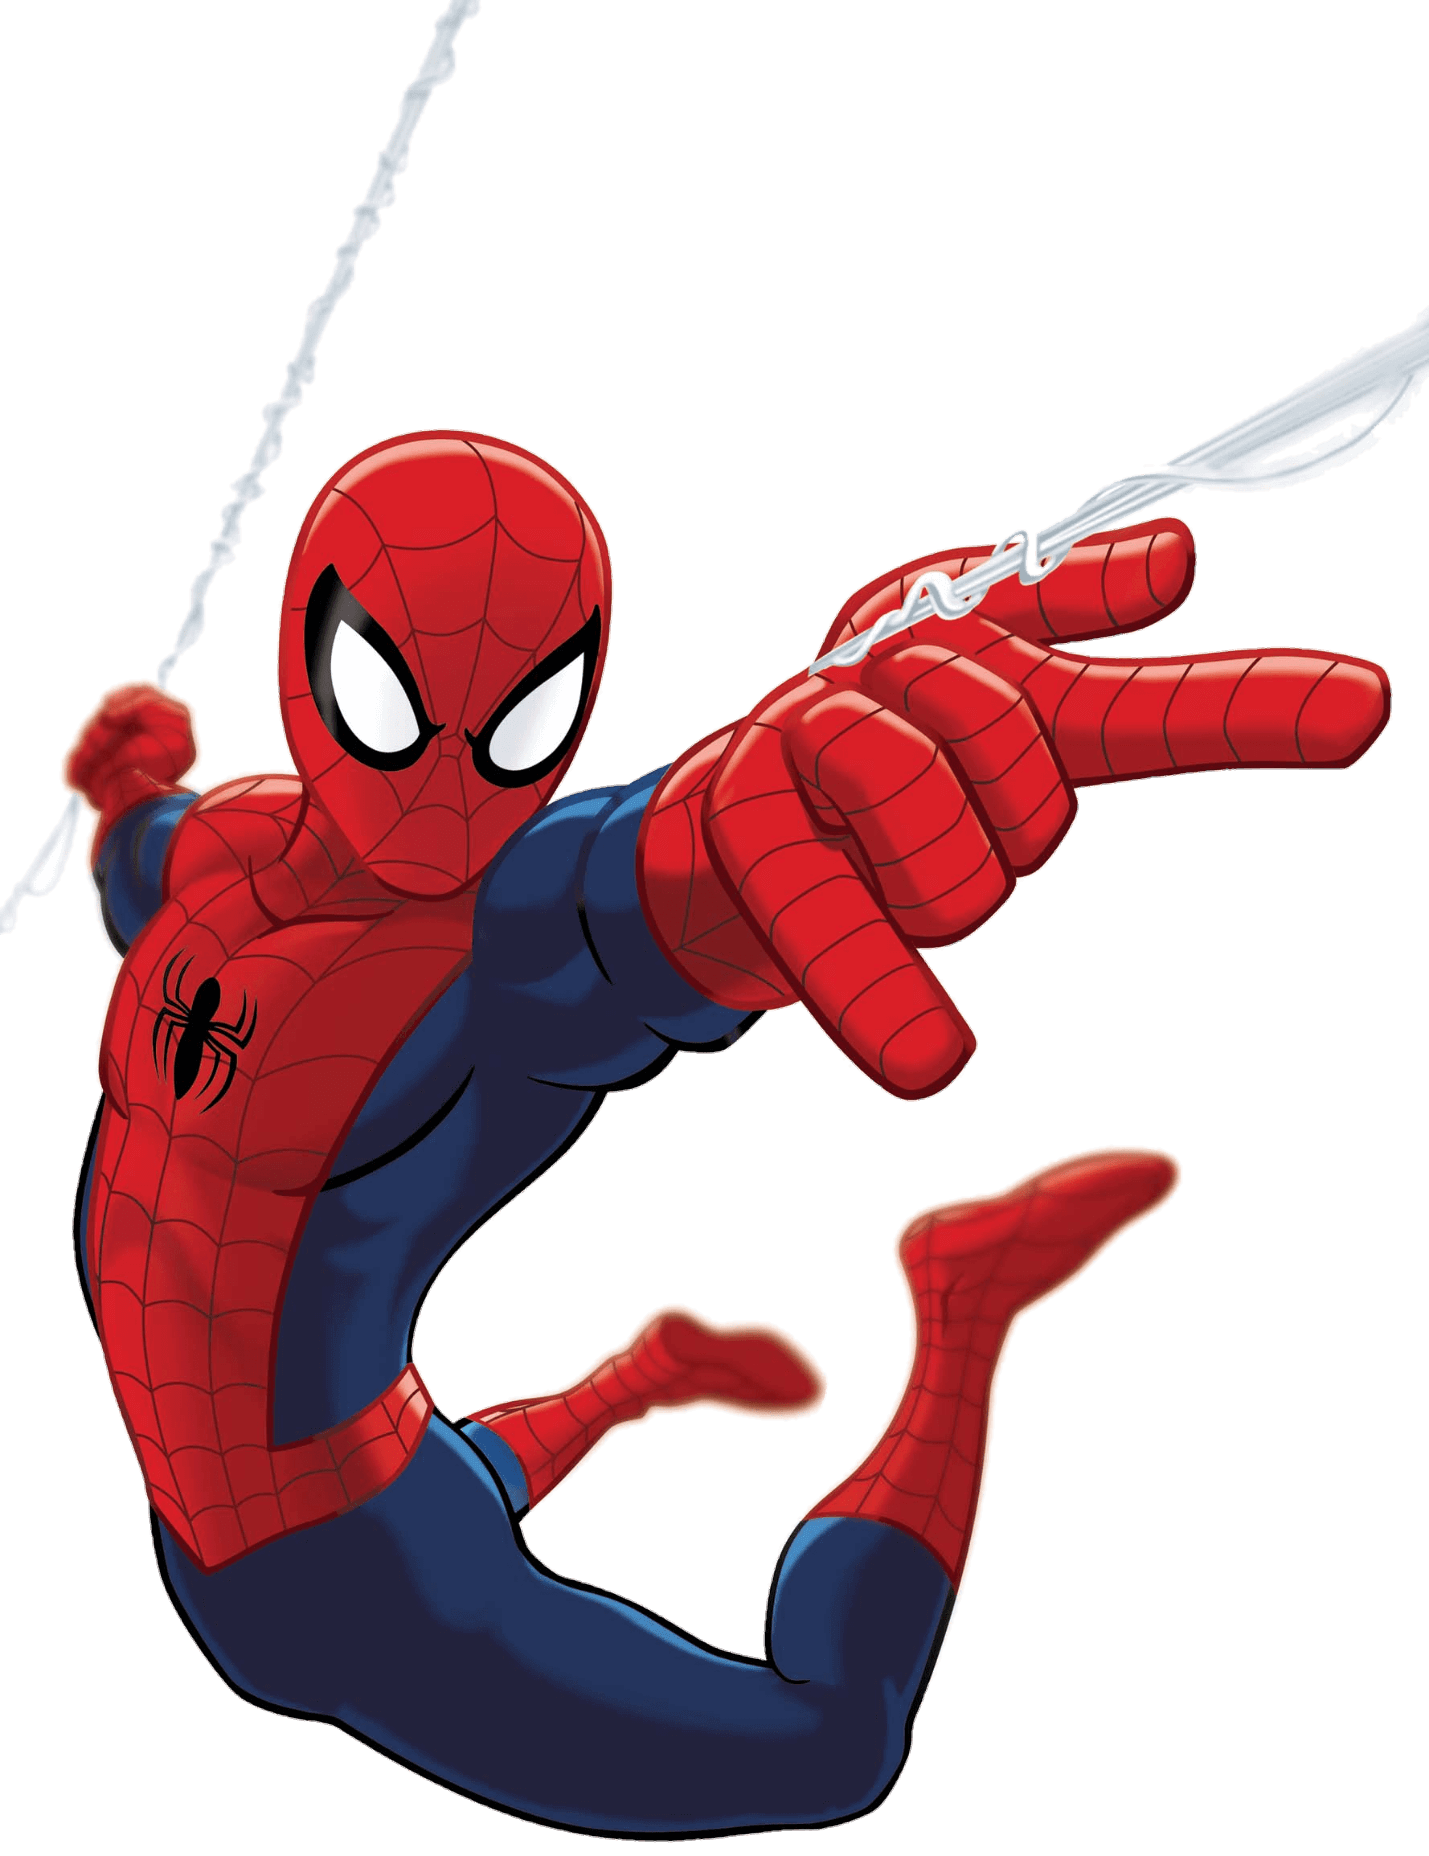 spider-man-png-from-pngfre-47-1